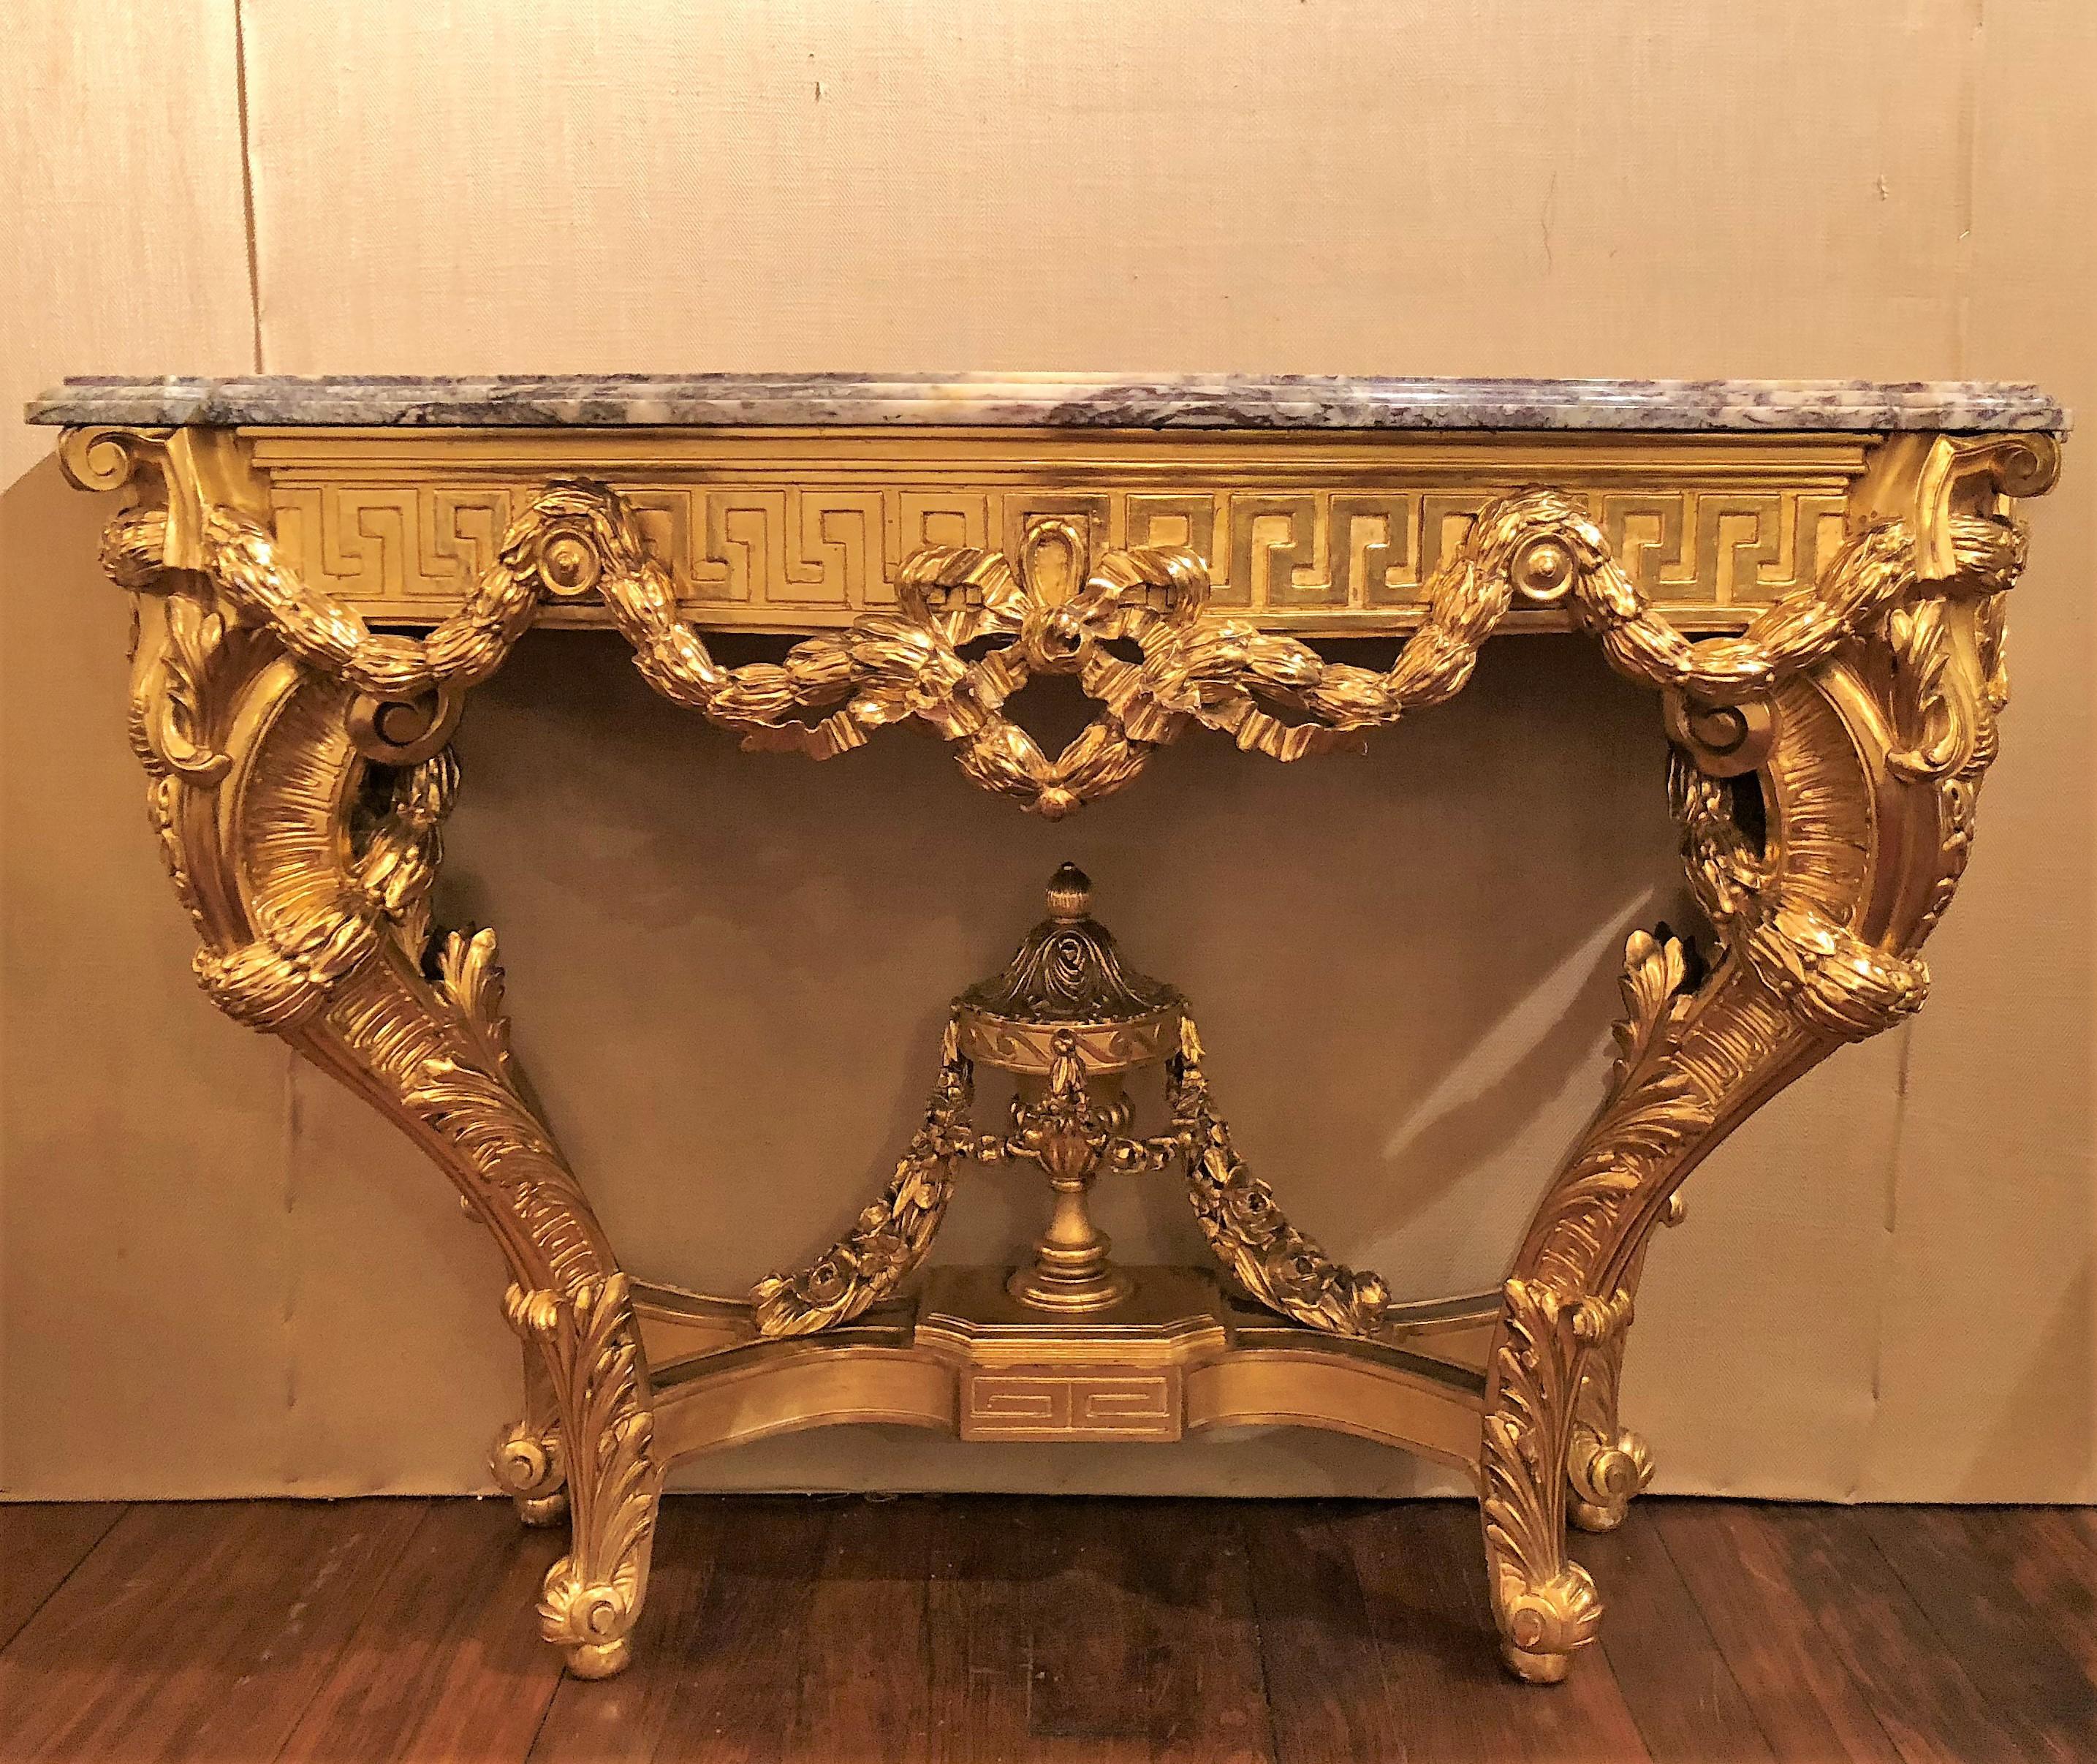 Antique French 19th century gold leaf console with marble top.